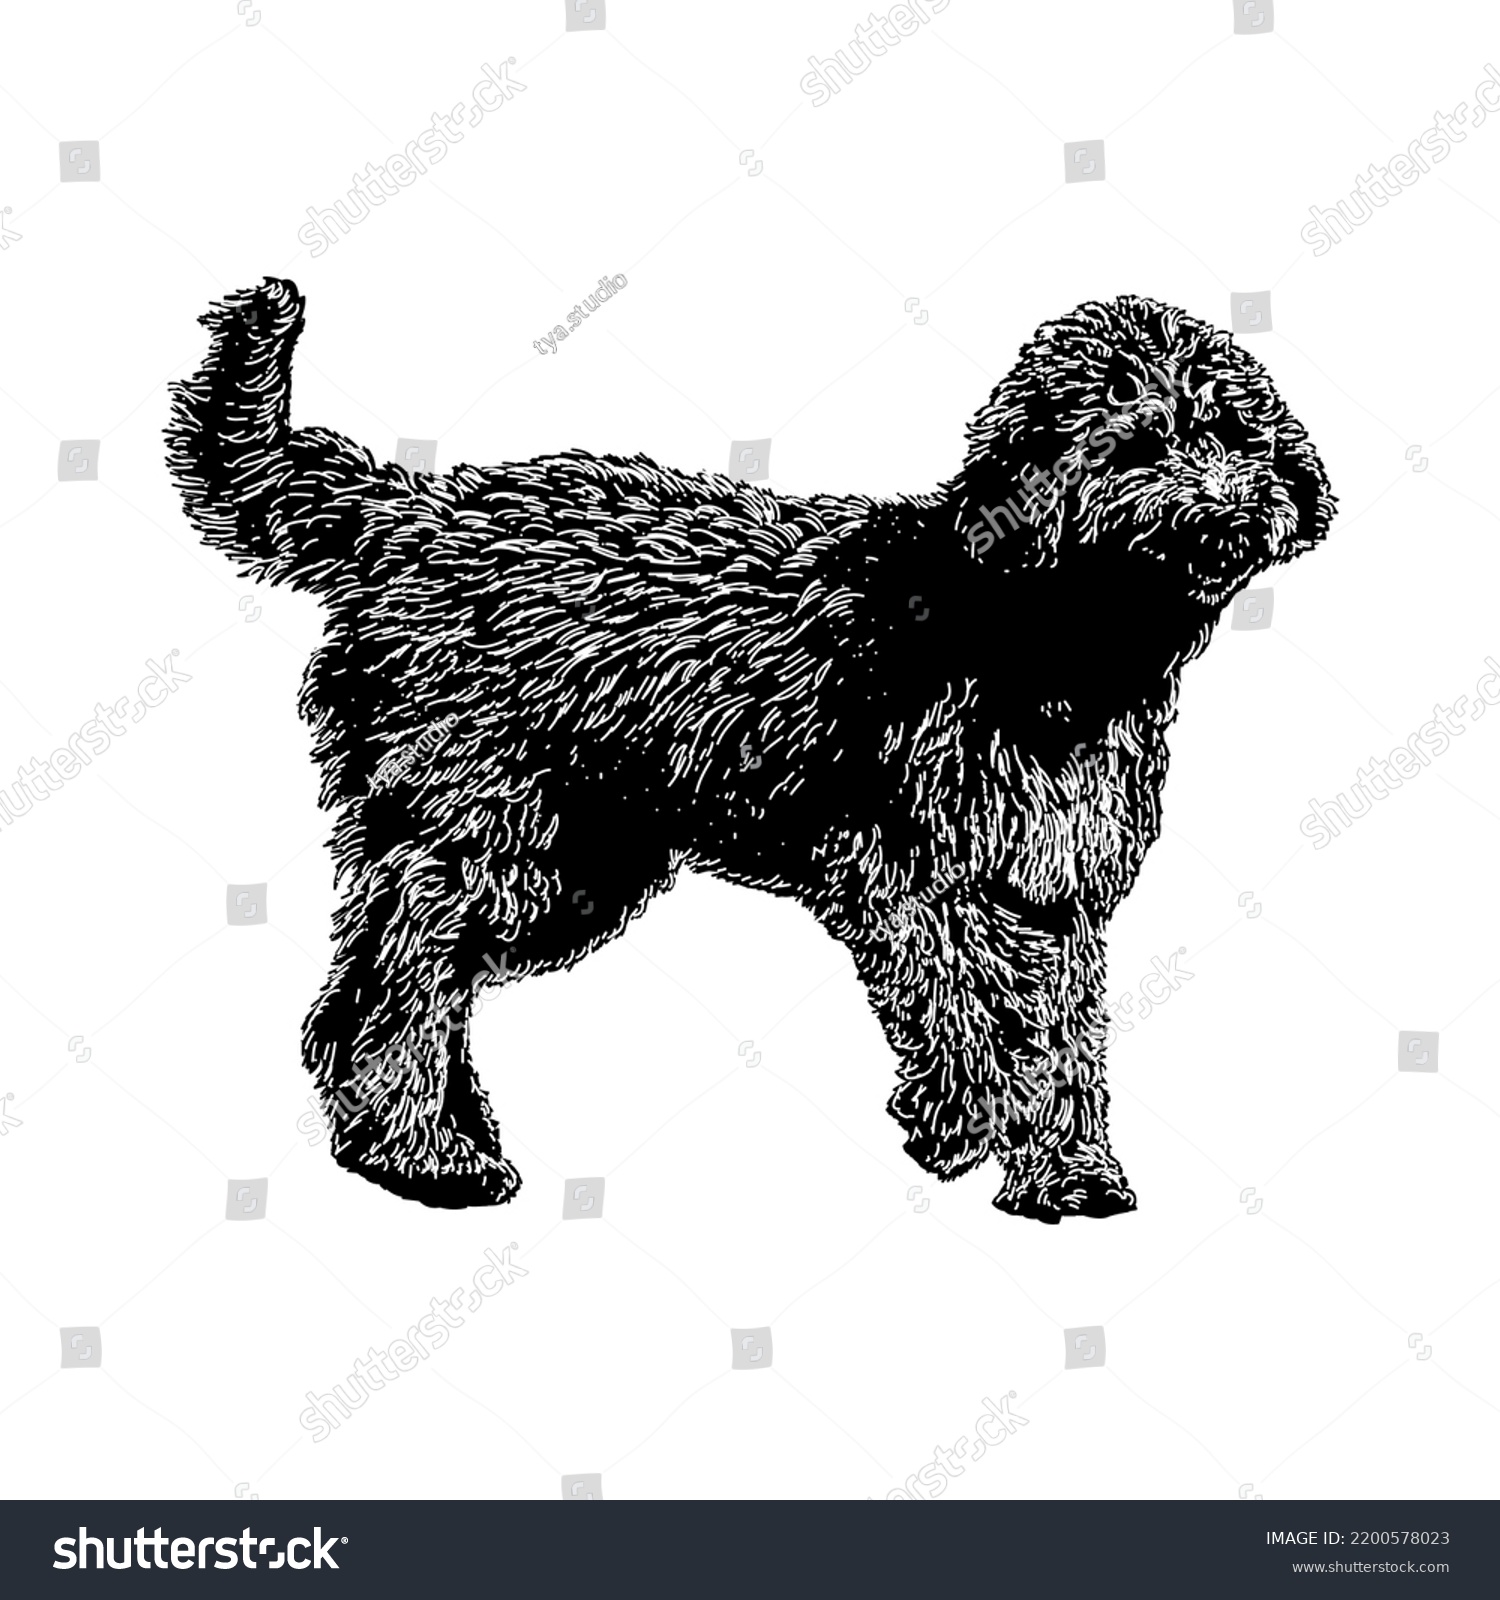 SVG of Irish Doodle hand drawing vector illustration isolated on white background svg